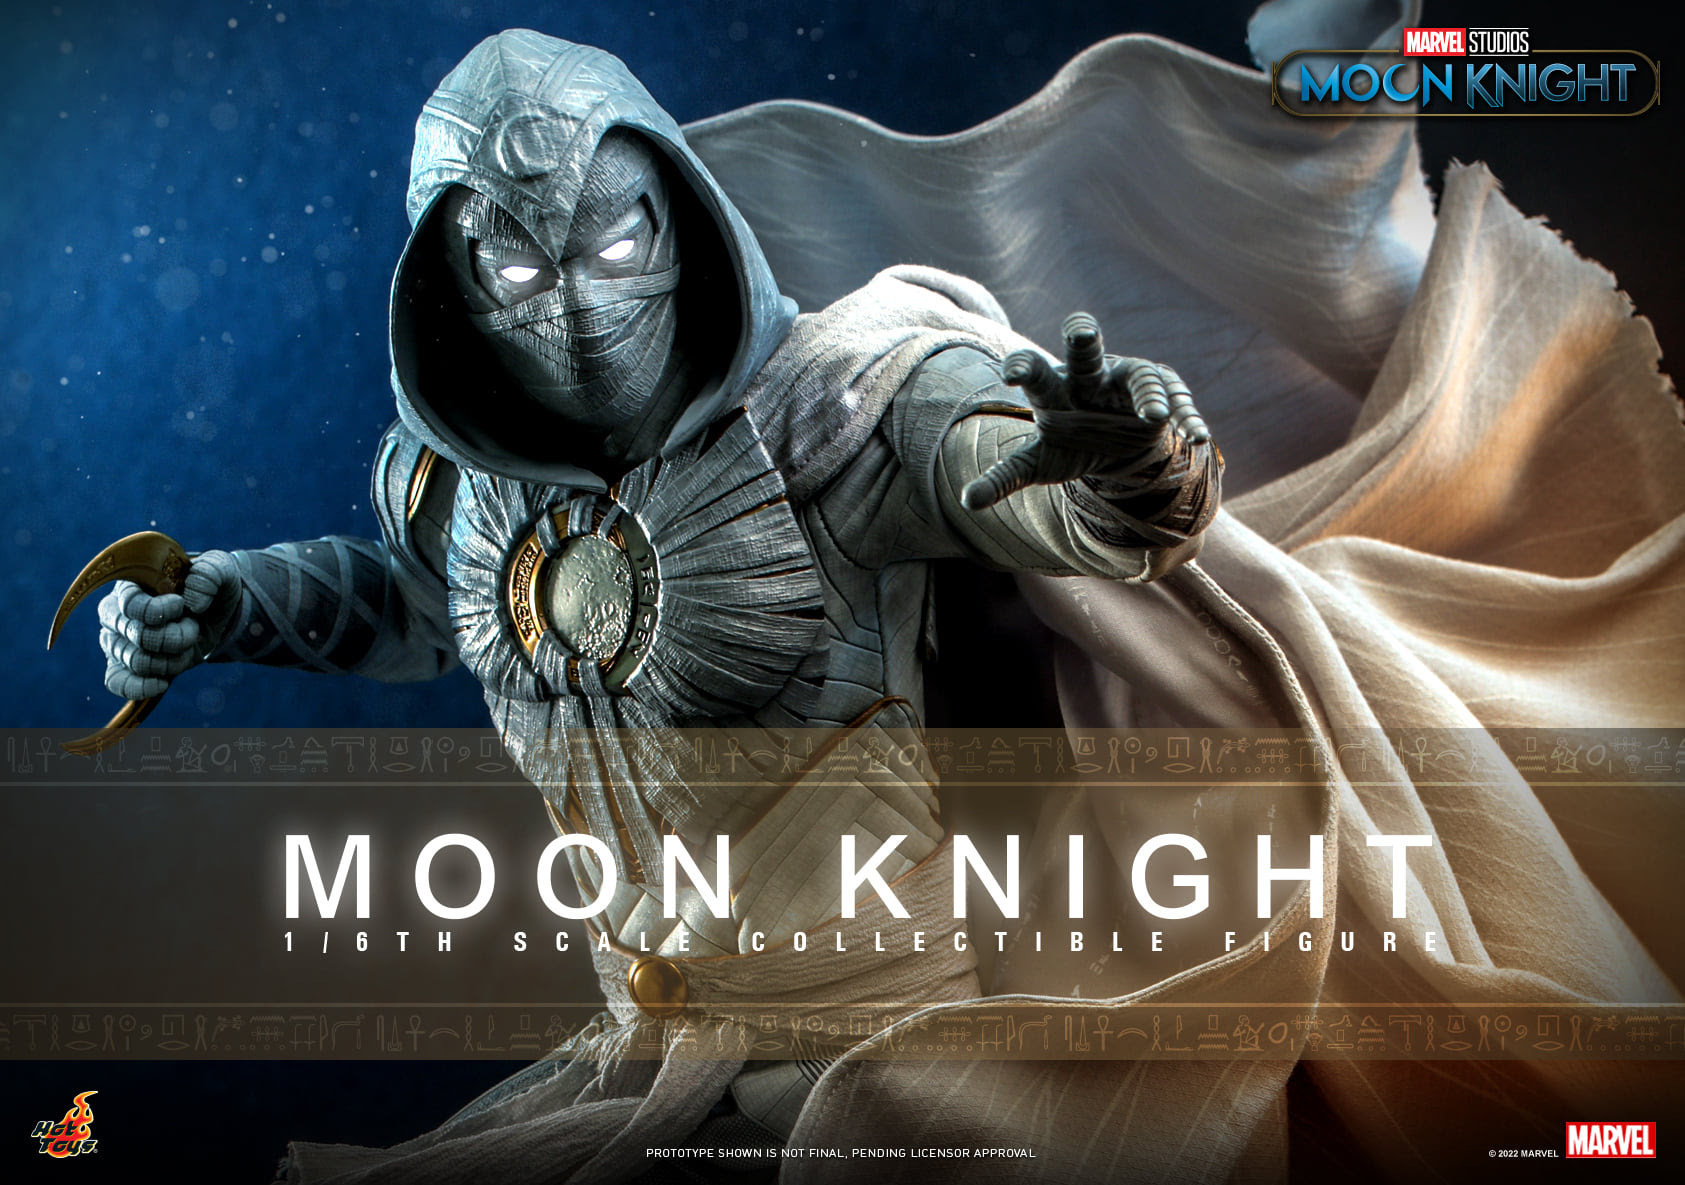 New Hot Toys Moon Knight action figure revealed